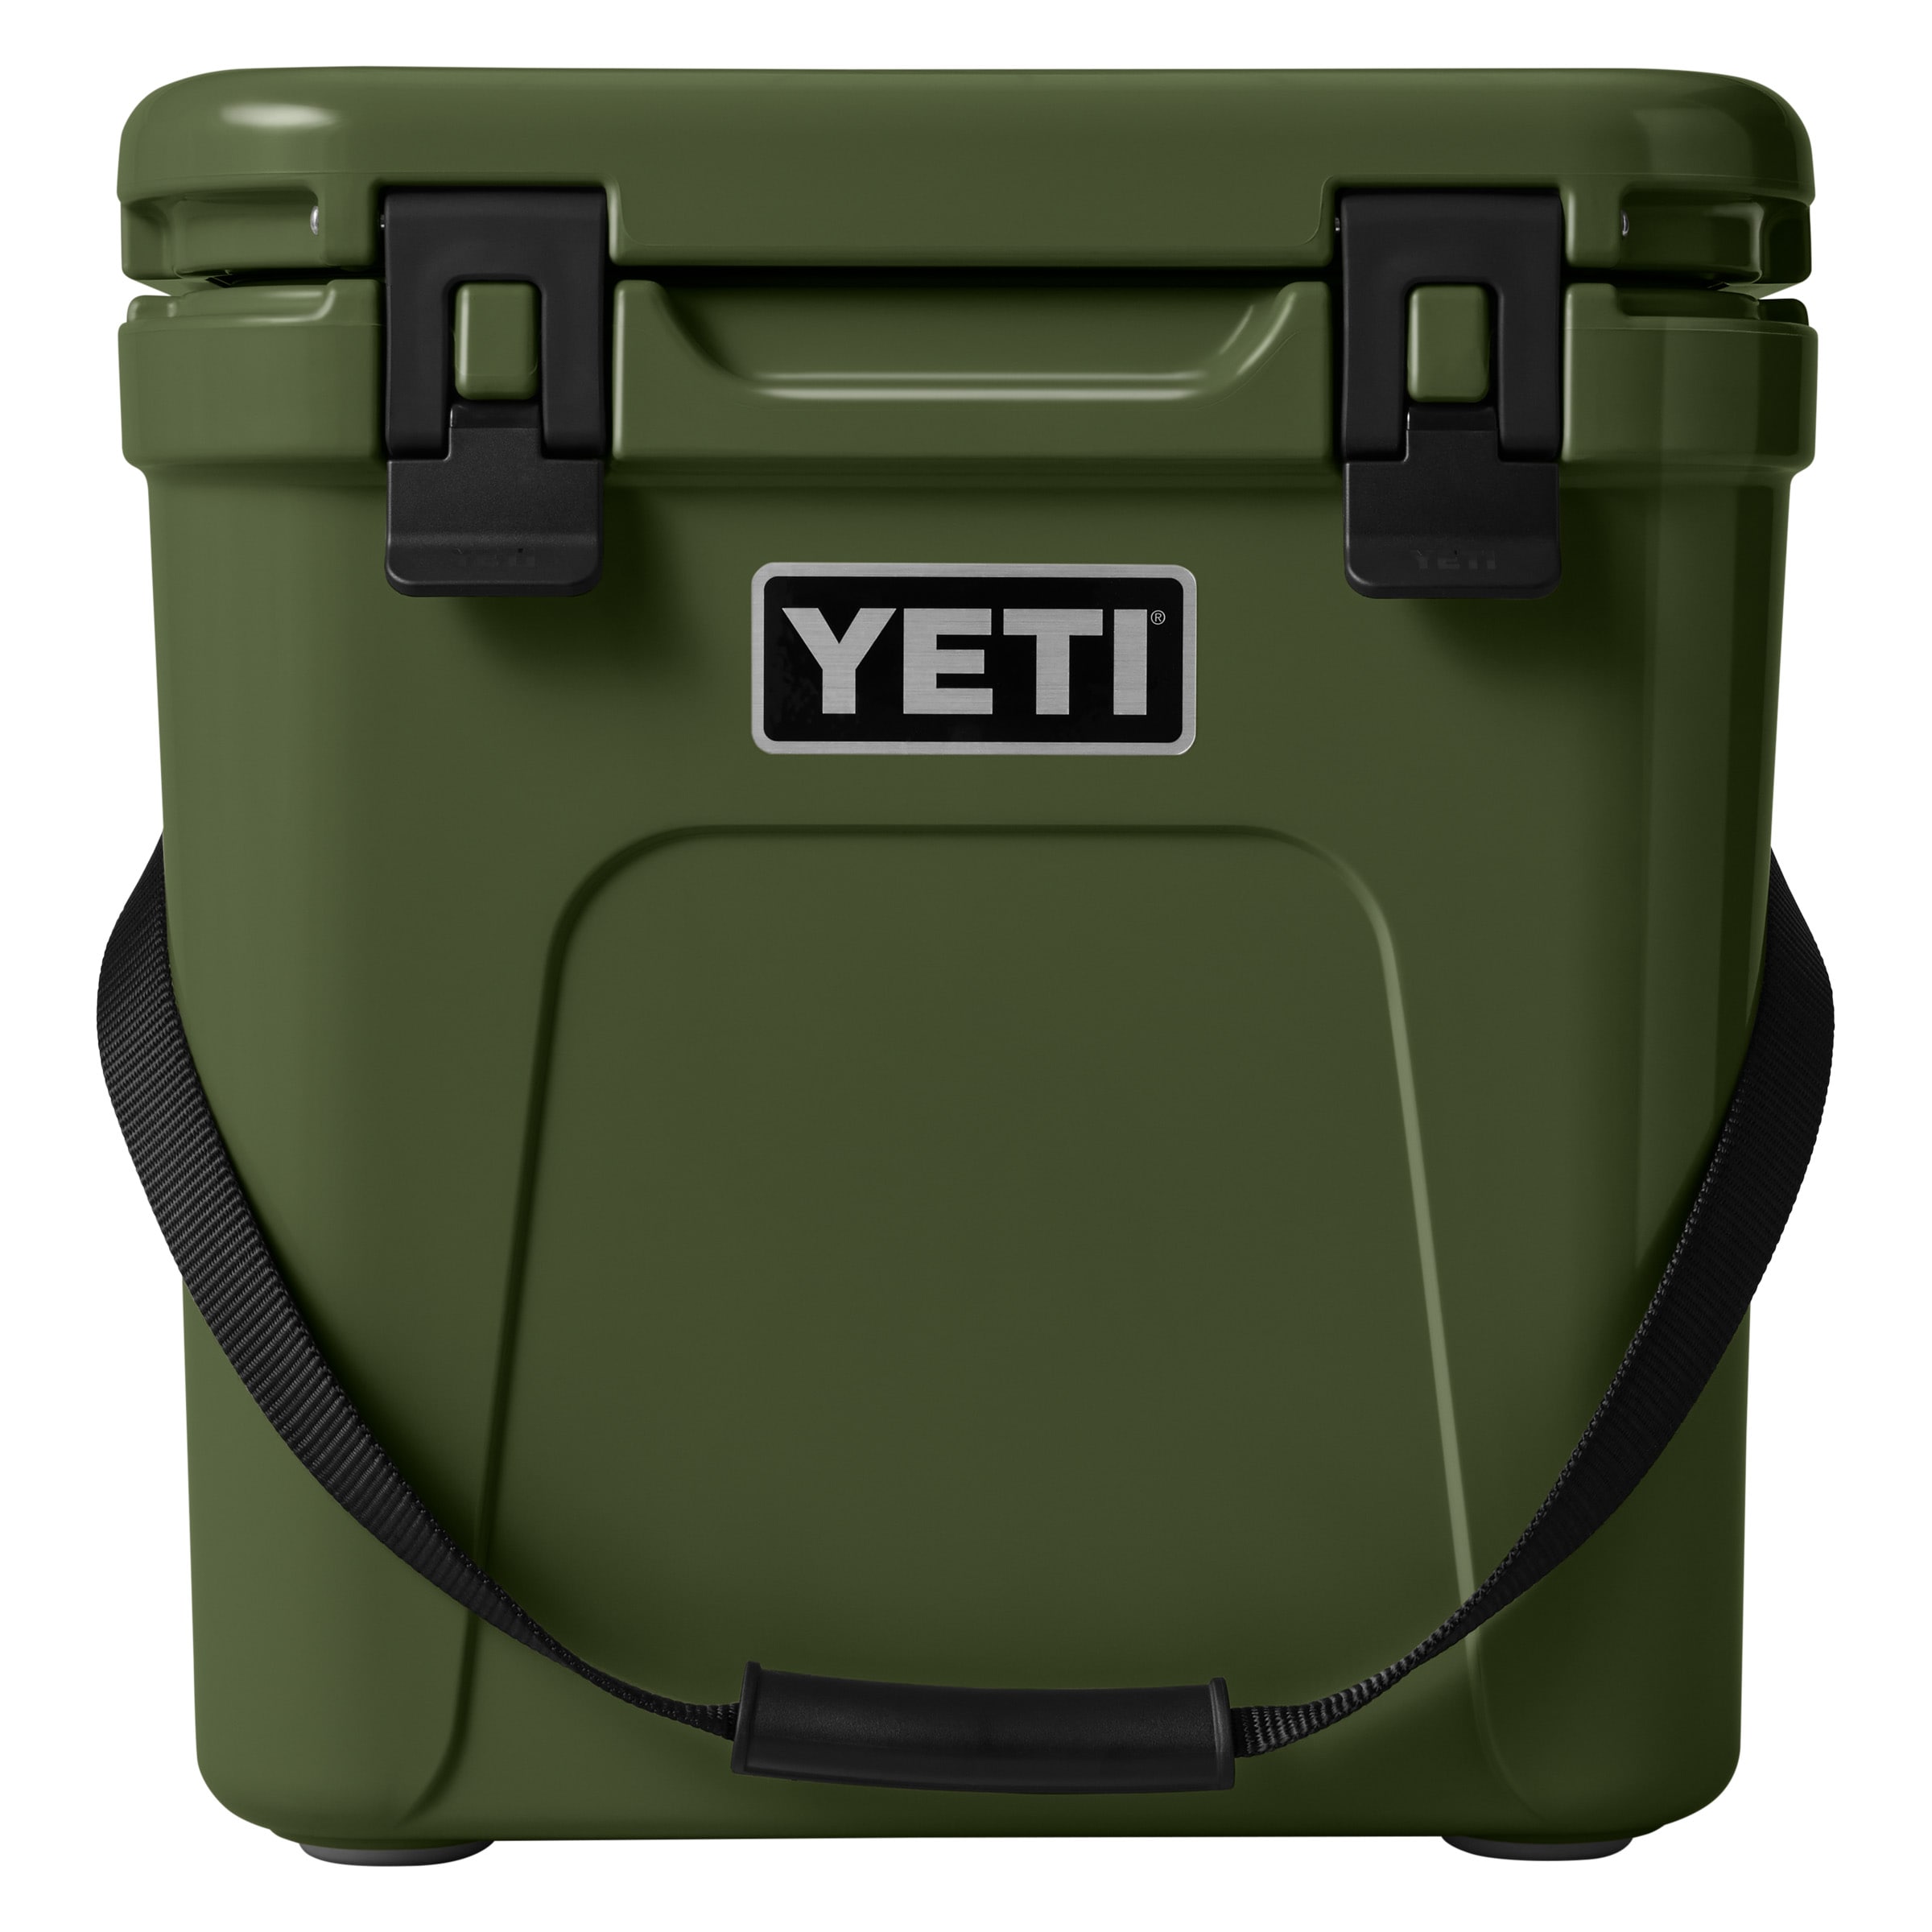 YETI Roadie 24 Insulated Chest Cooler, Highlands Olive in the 